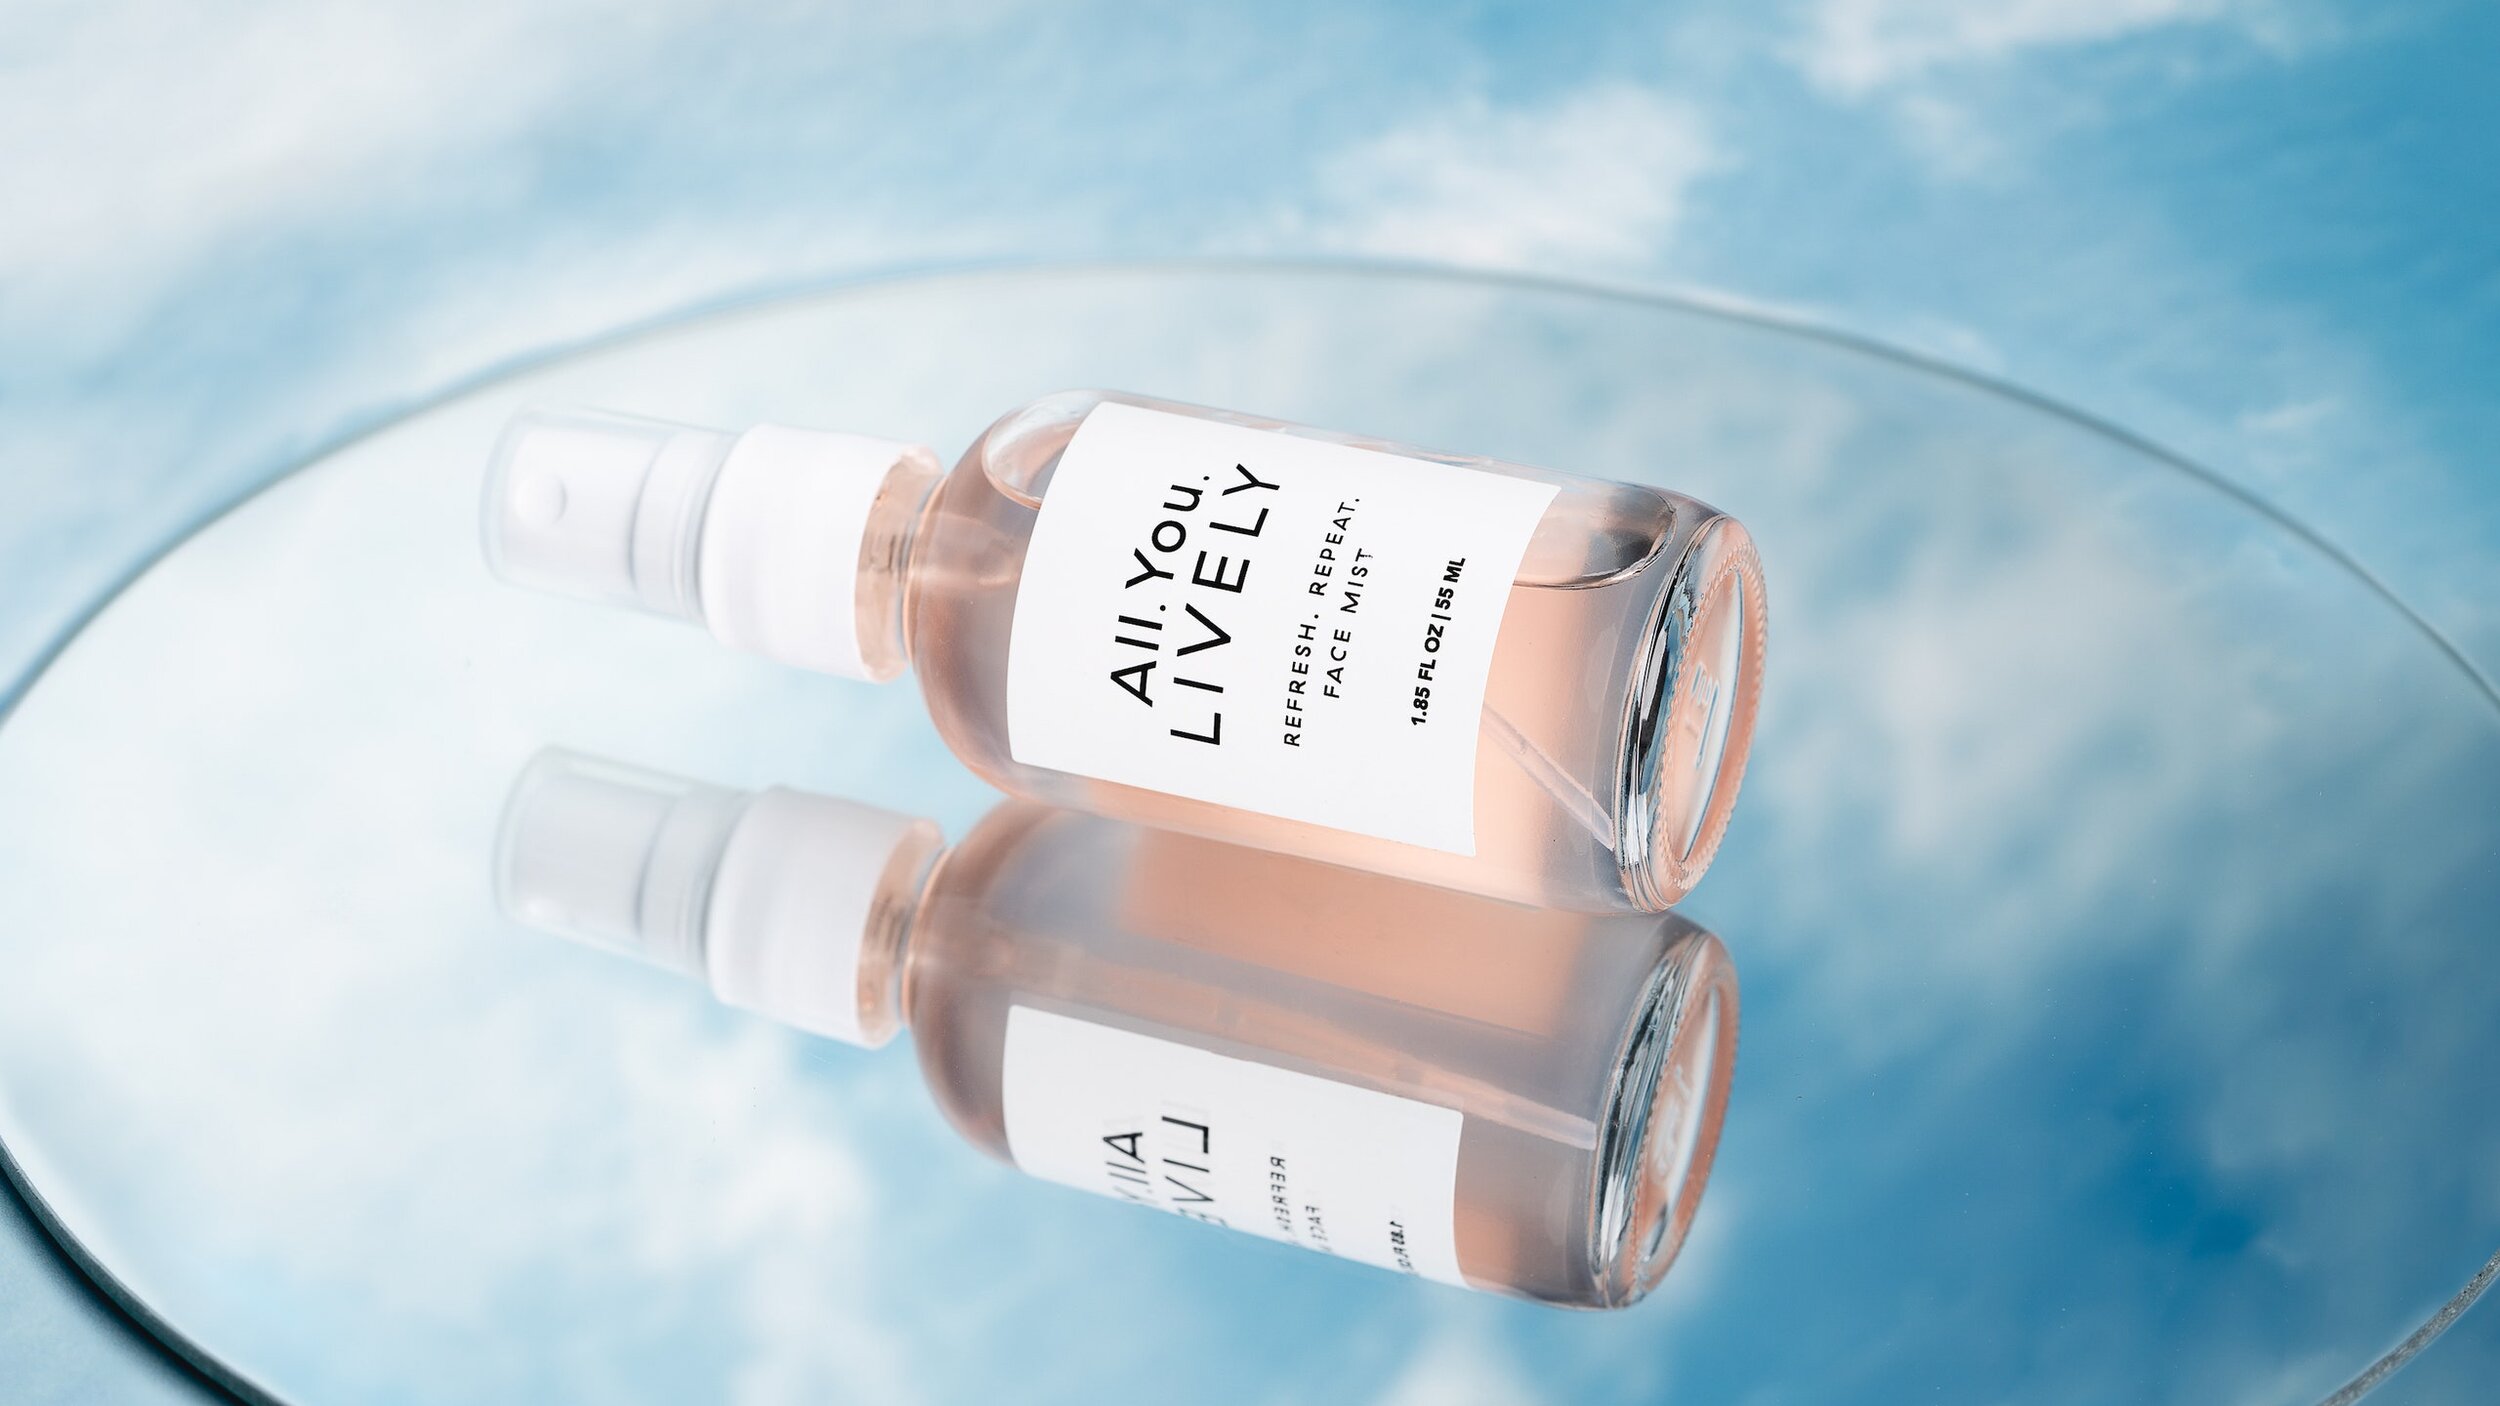 Allure | Lingerie Brand Lively Just Dropped an Affordable Skin-Care Range 